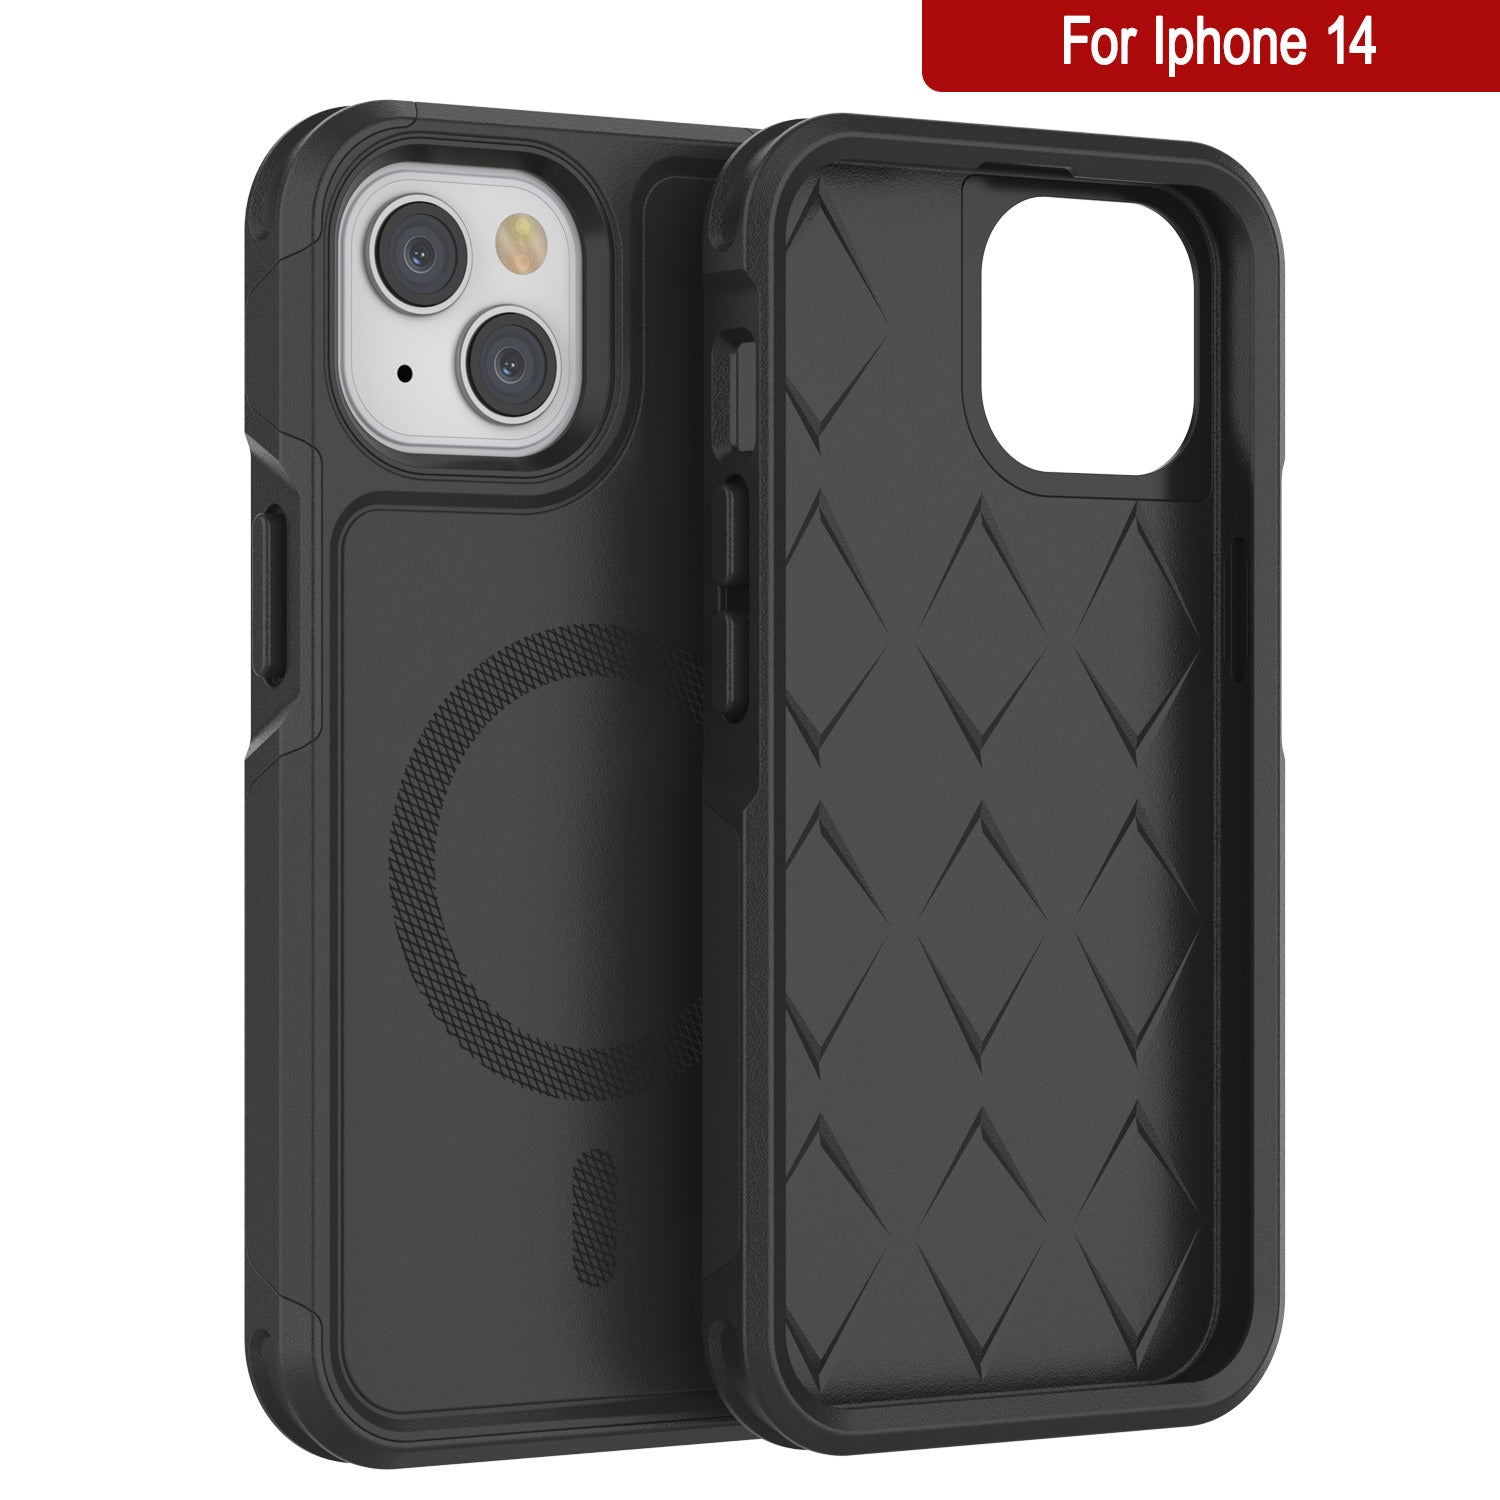 PunkCase iPhone 14 Case, [Spartan 2.0 Series] Clear Rugged Heavy Duty Cover W/Built in Screen Protector [Black]